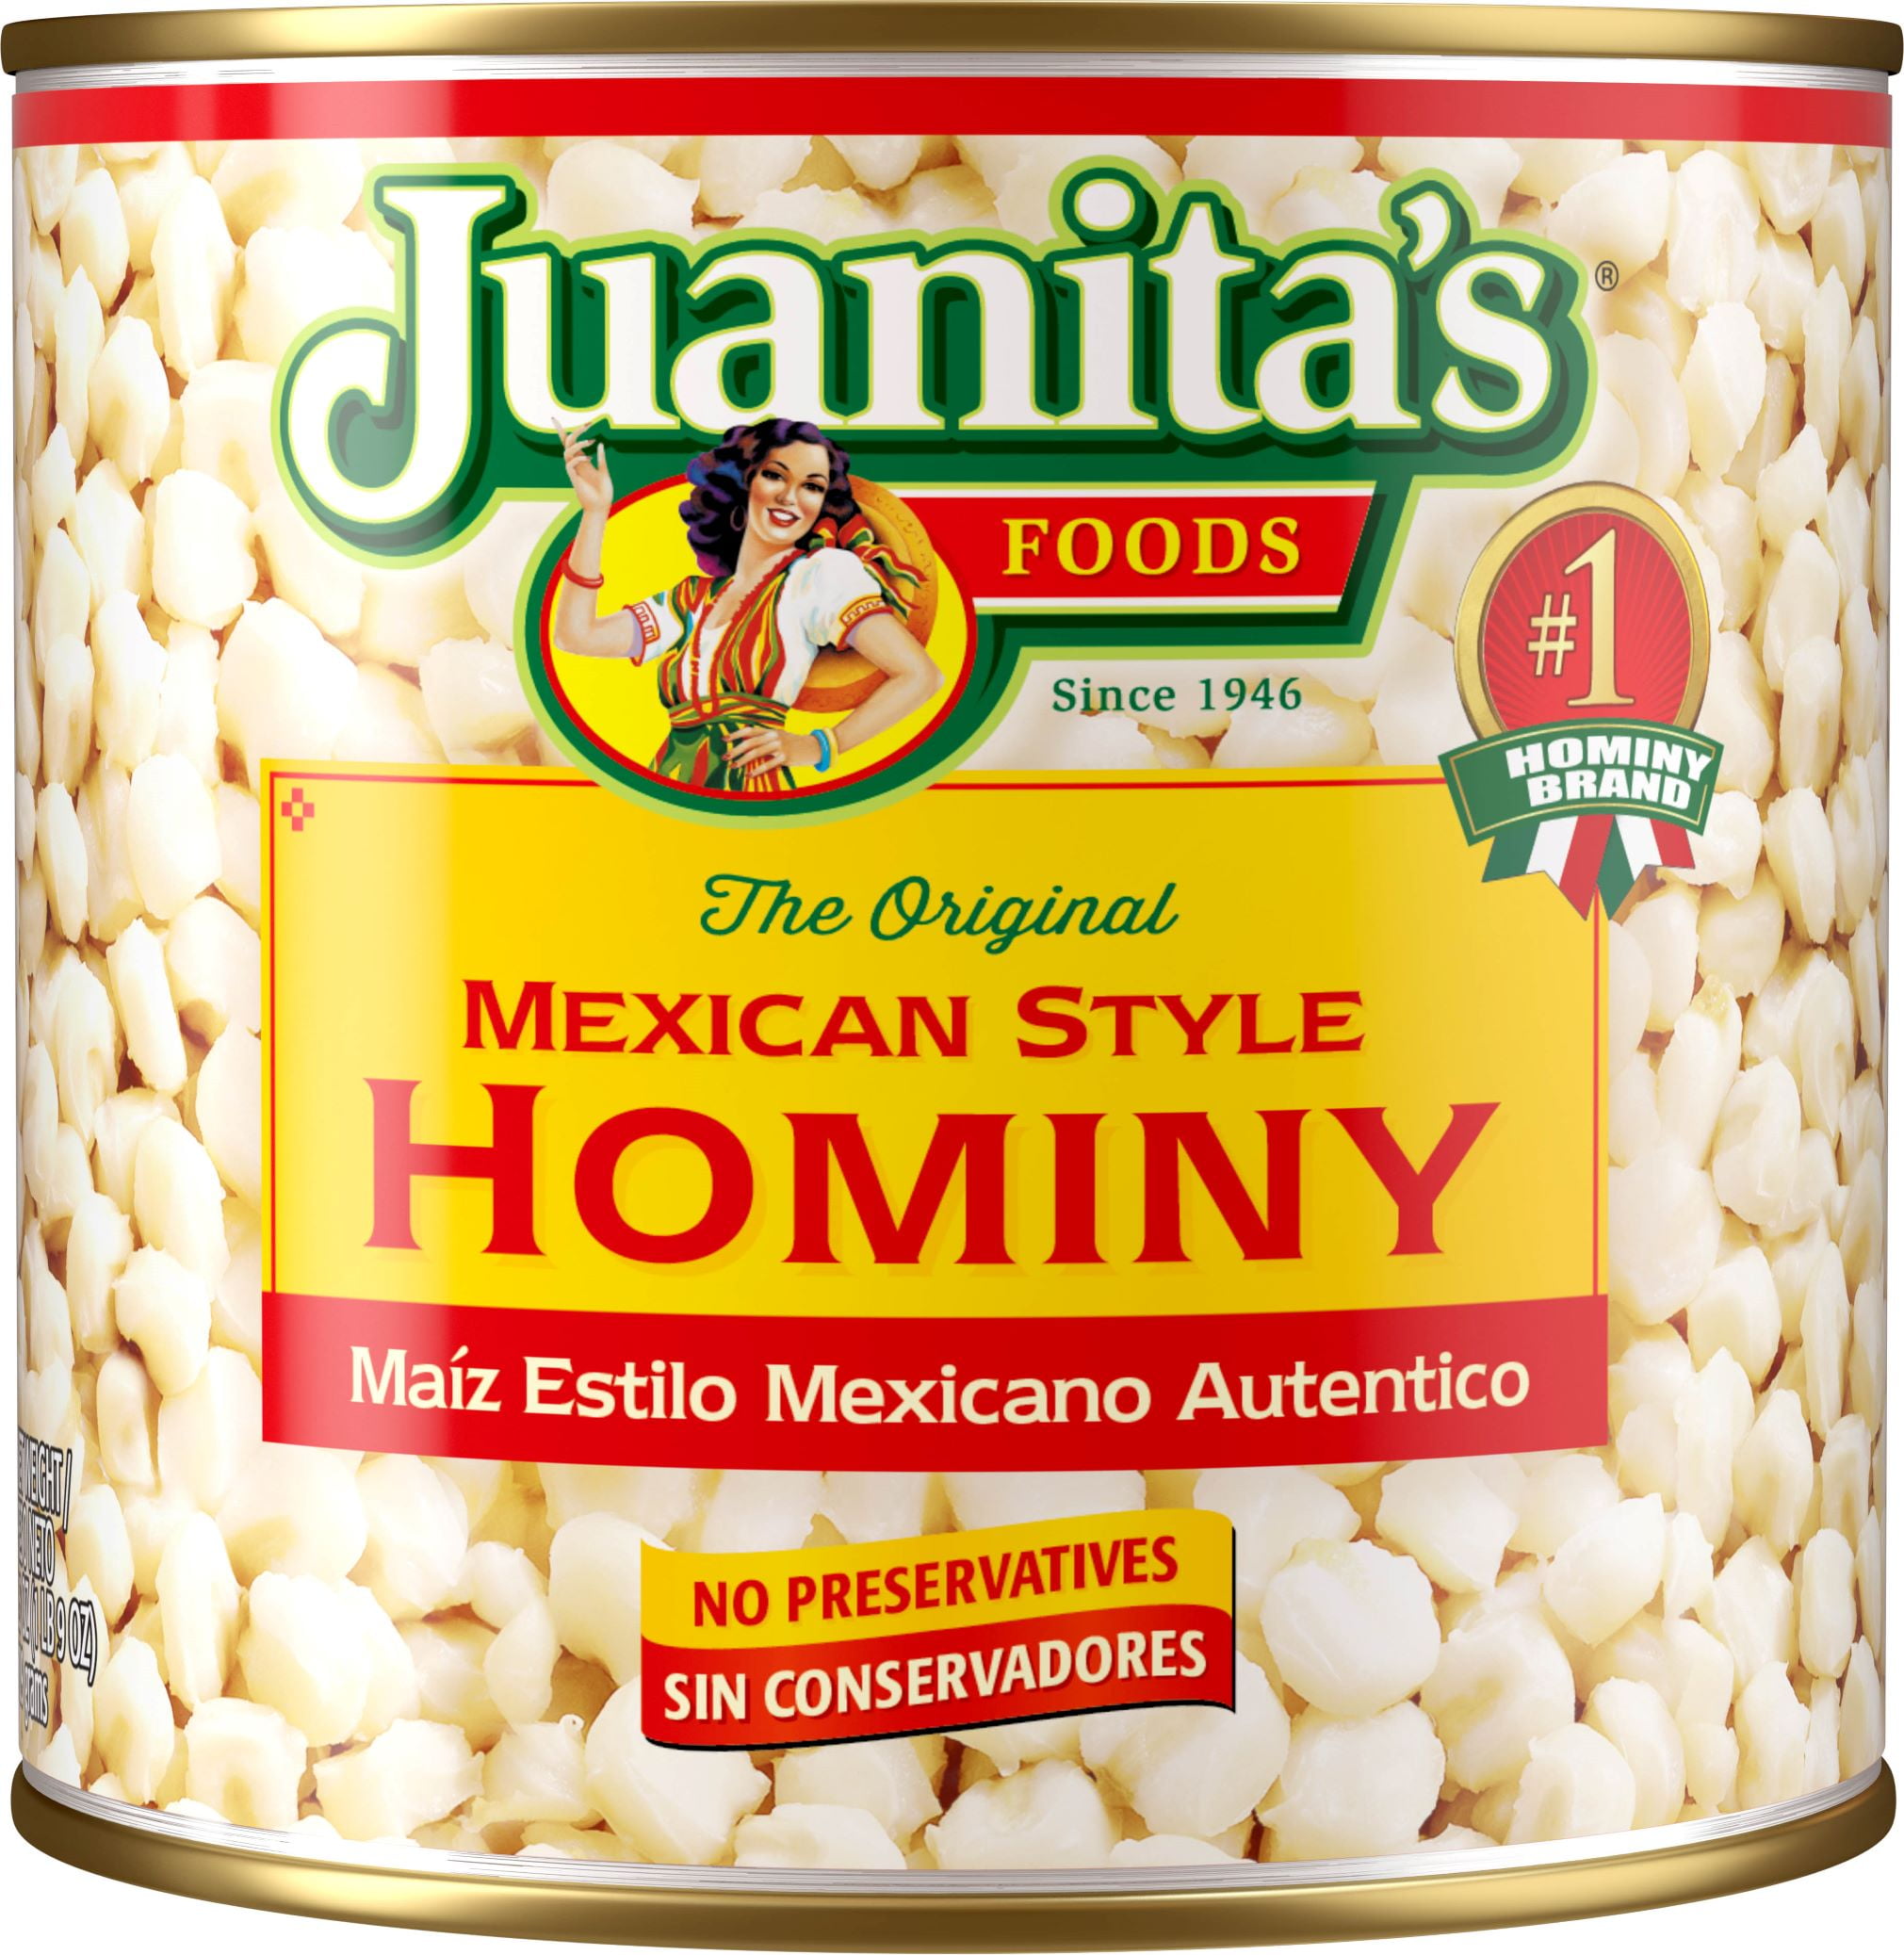 Juanita's Foods Mexican Style Hominy, Canned Hominy, 25 oz Shelf Stable